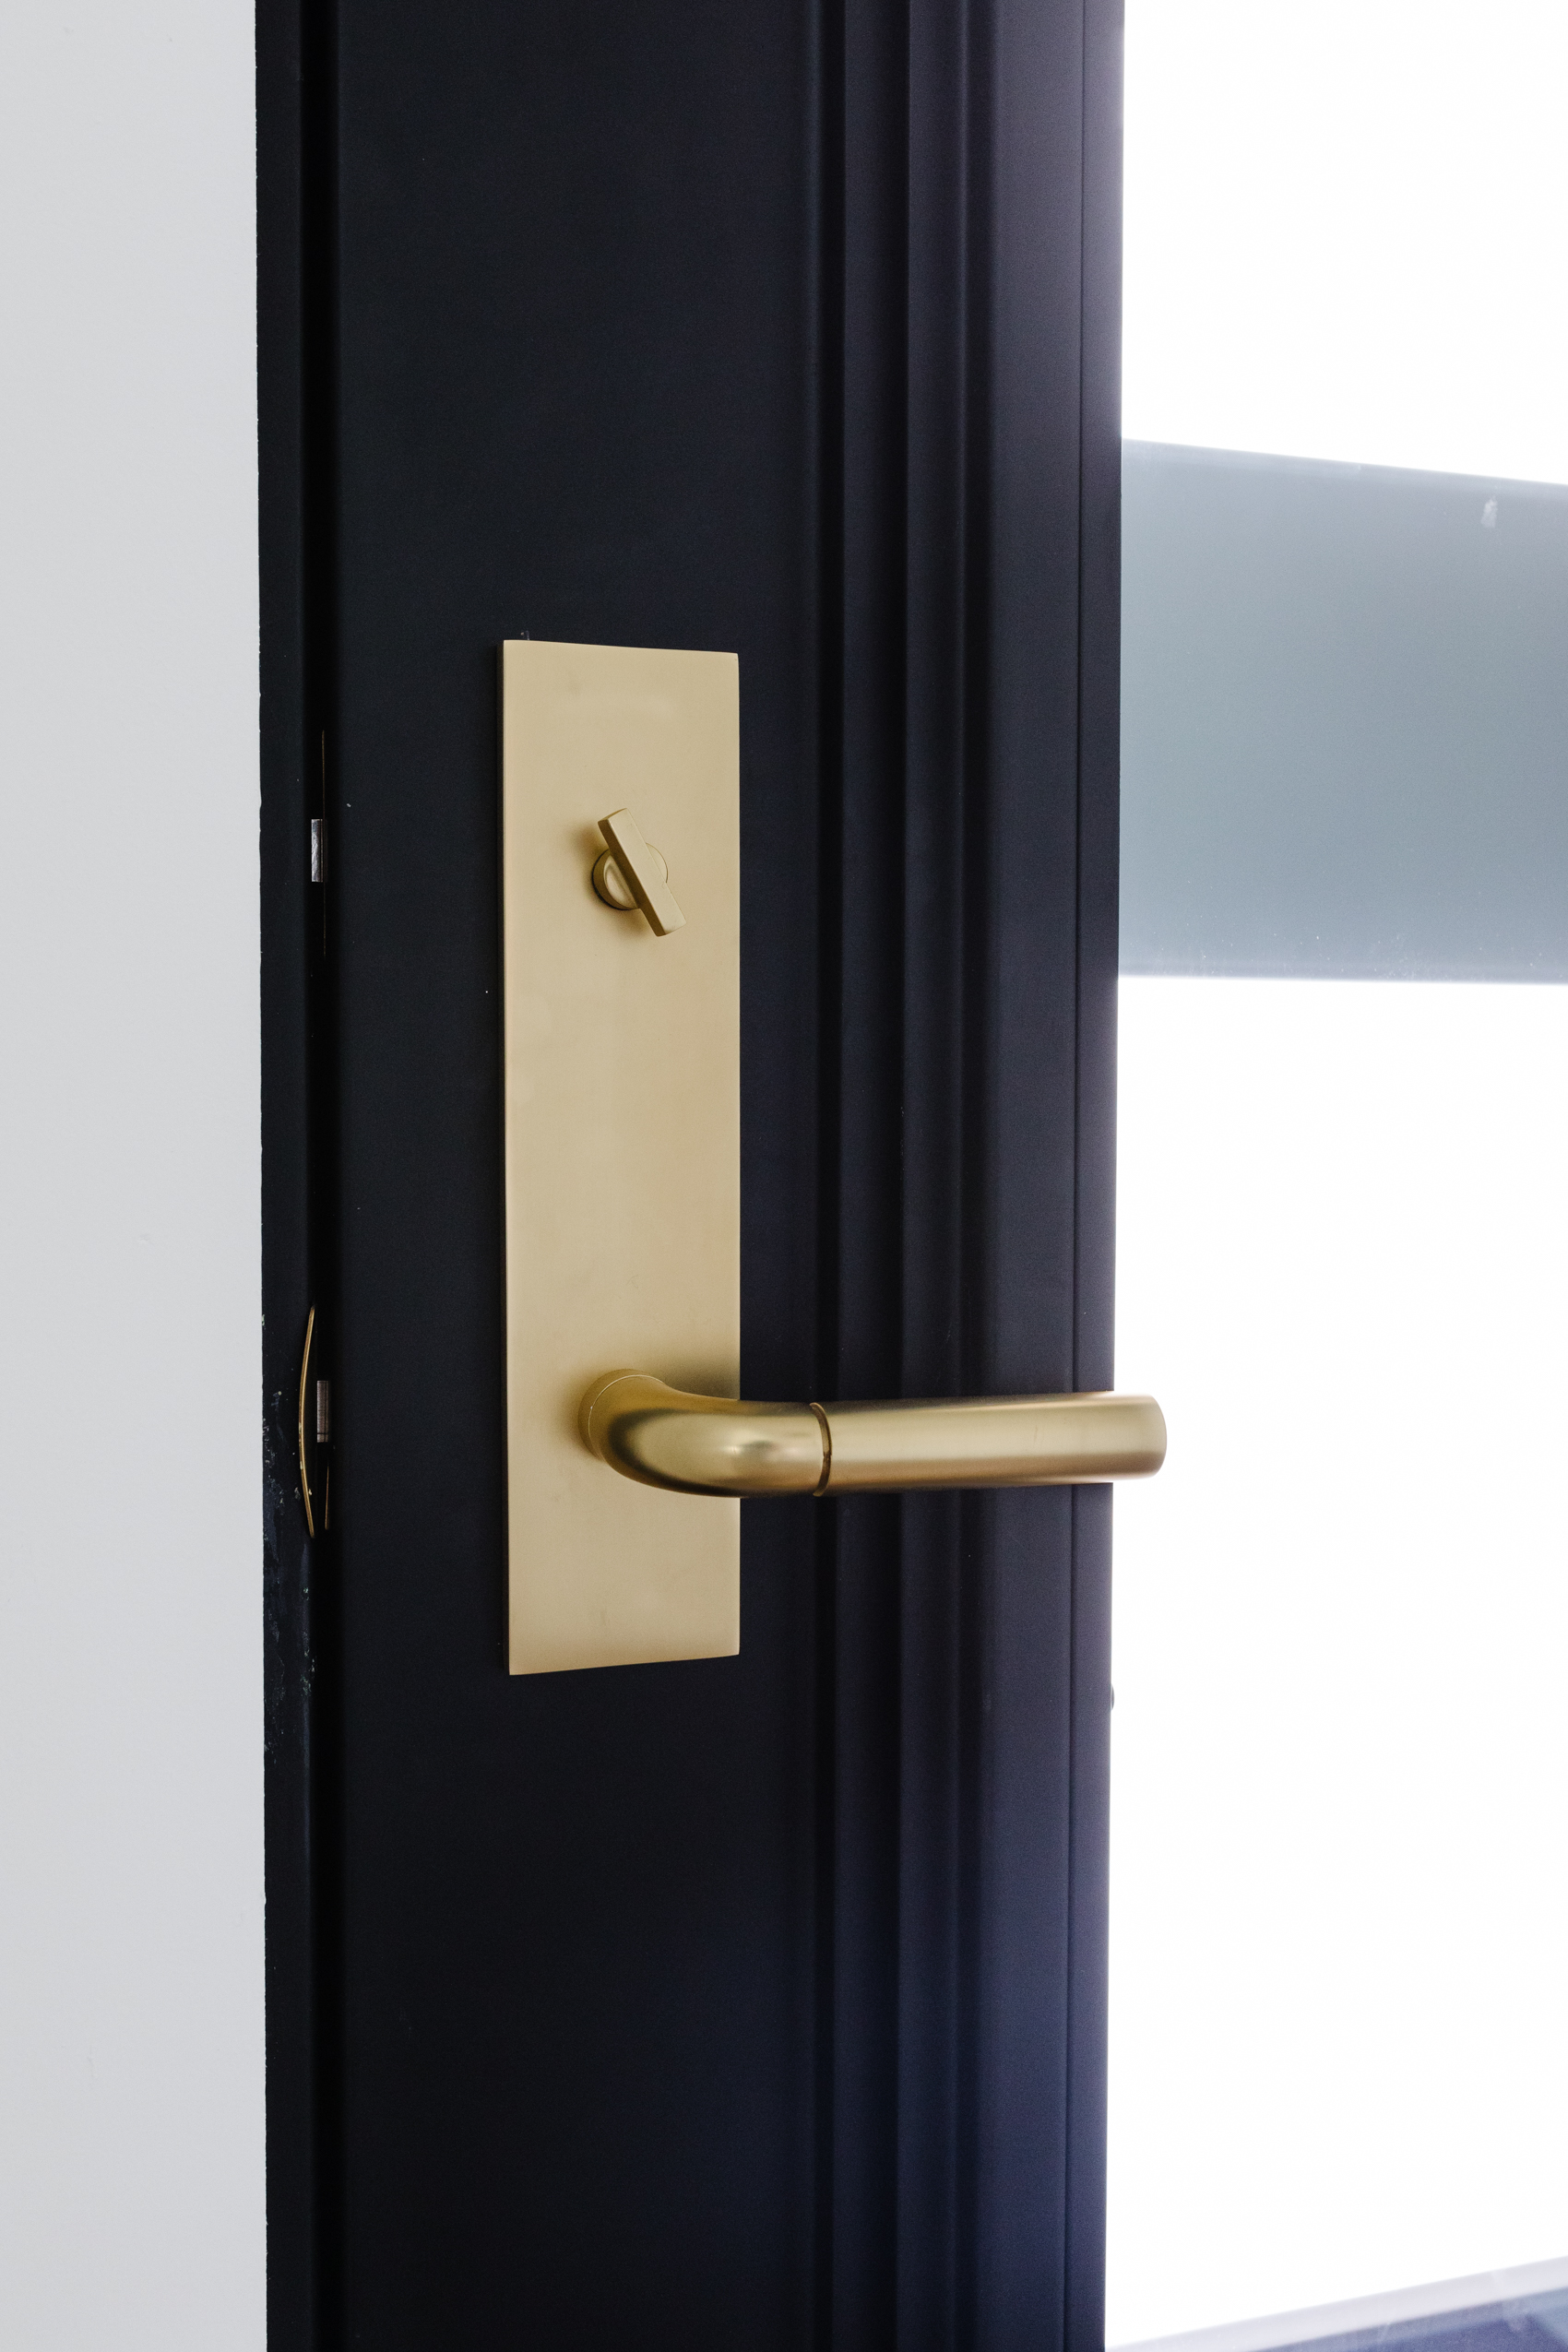 Aged brass Tumalo lock from Rejuvenation on an iron front door